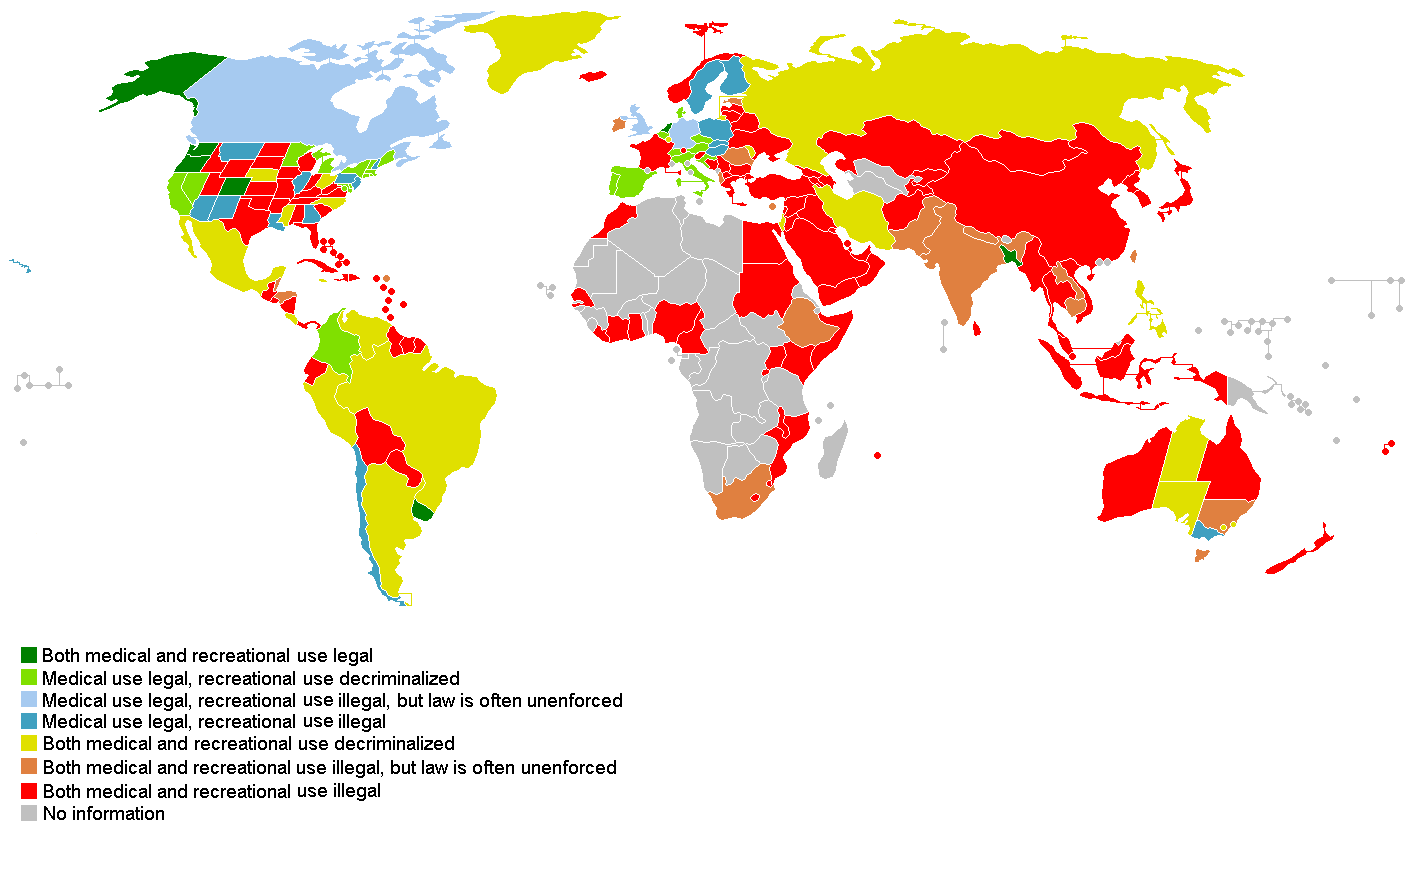 Legality of cannabis by country